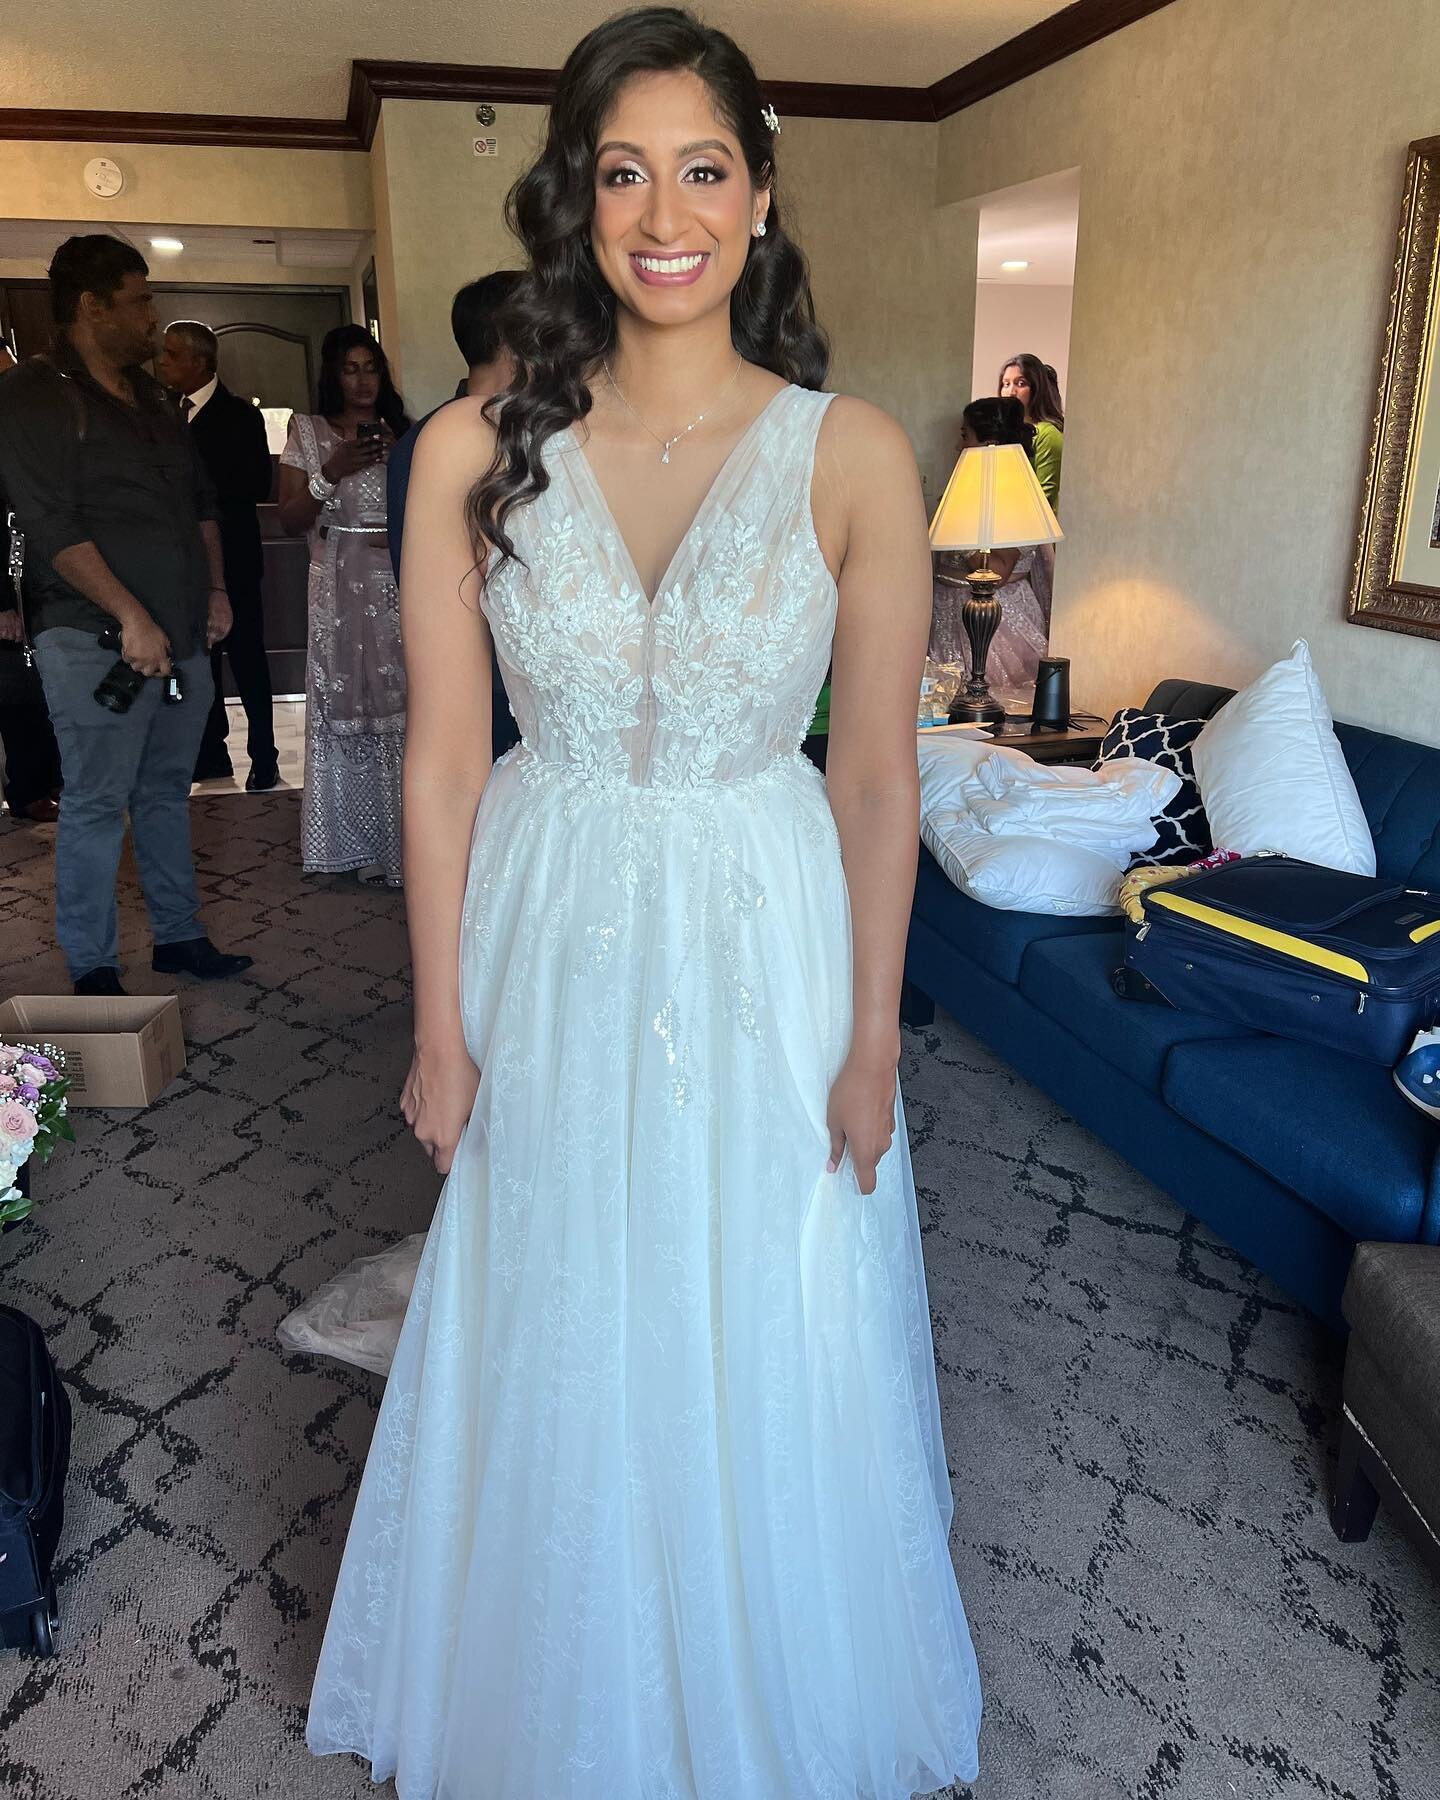 The blushing bride&hellip;#glamorousbyjuanita 

Our bride opted for this soft glam look for her big day and we&rsquo;re loving it. Making women feel beautiful for life&rsquo;s biggest moments is what we do! 

Bridal Stylist @ltbeautybylouie.takahashi